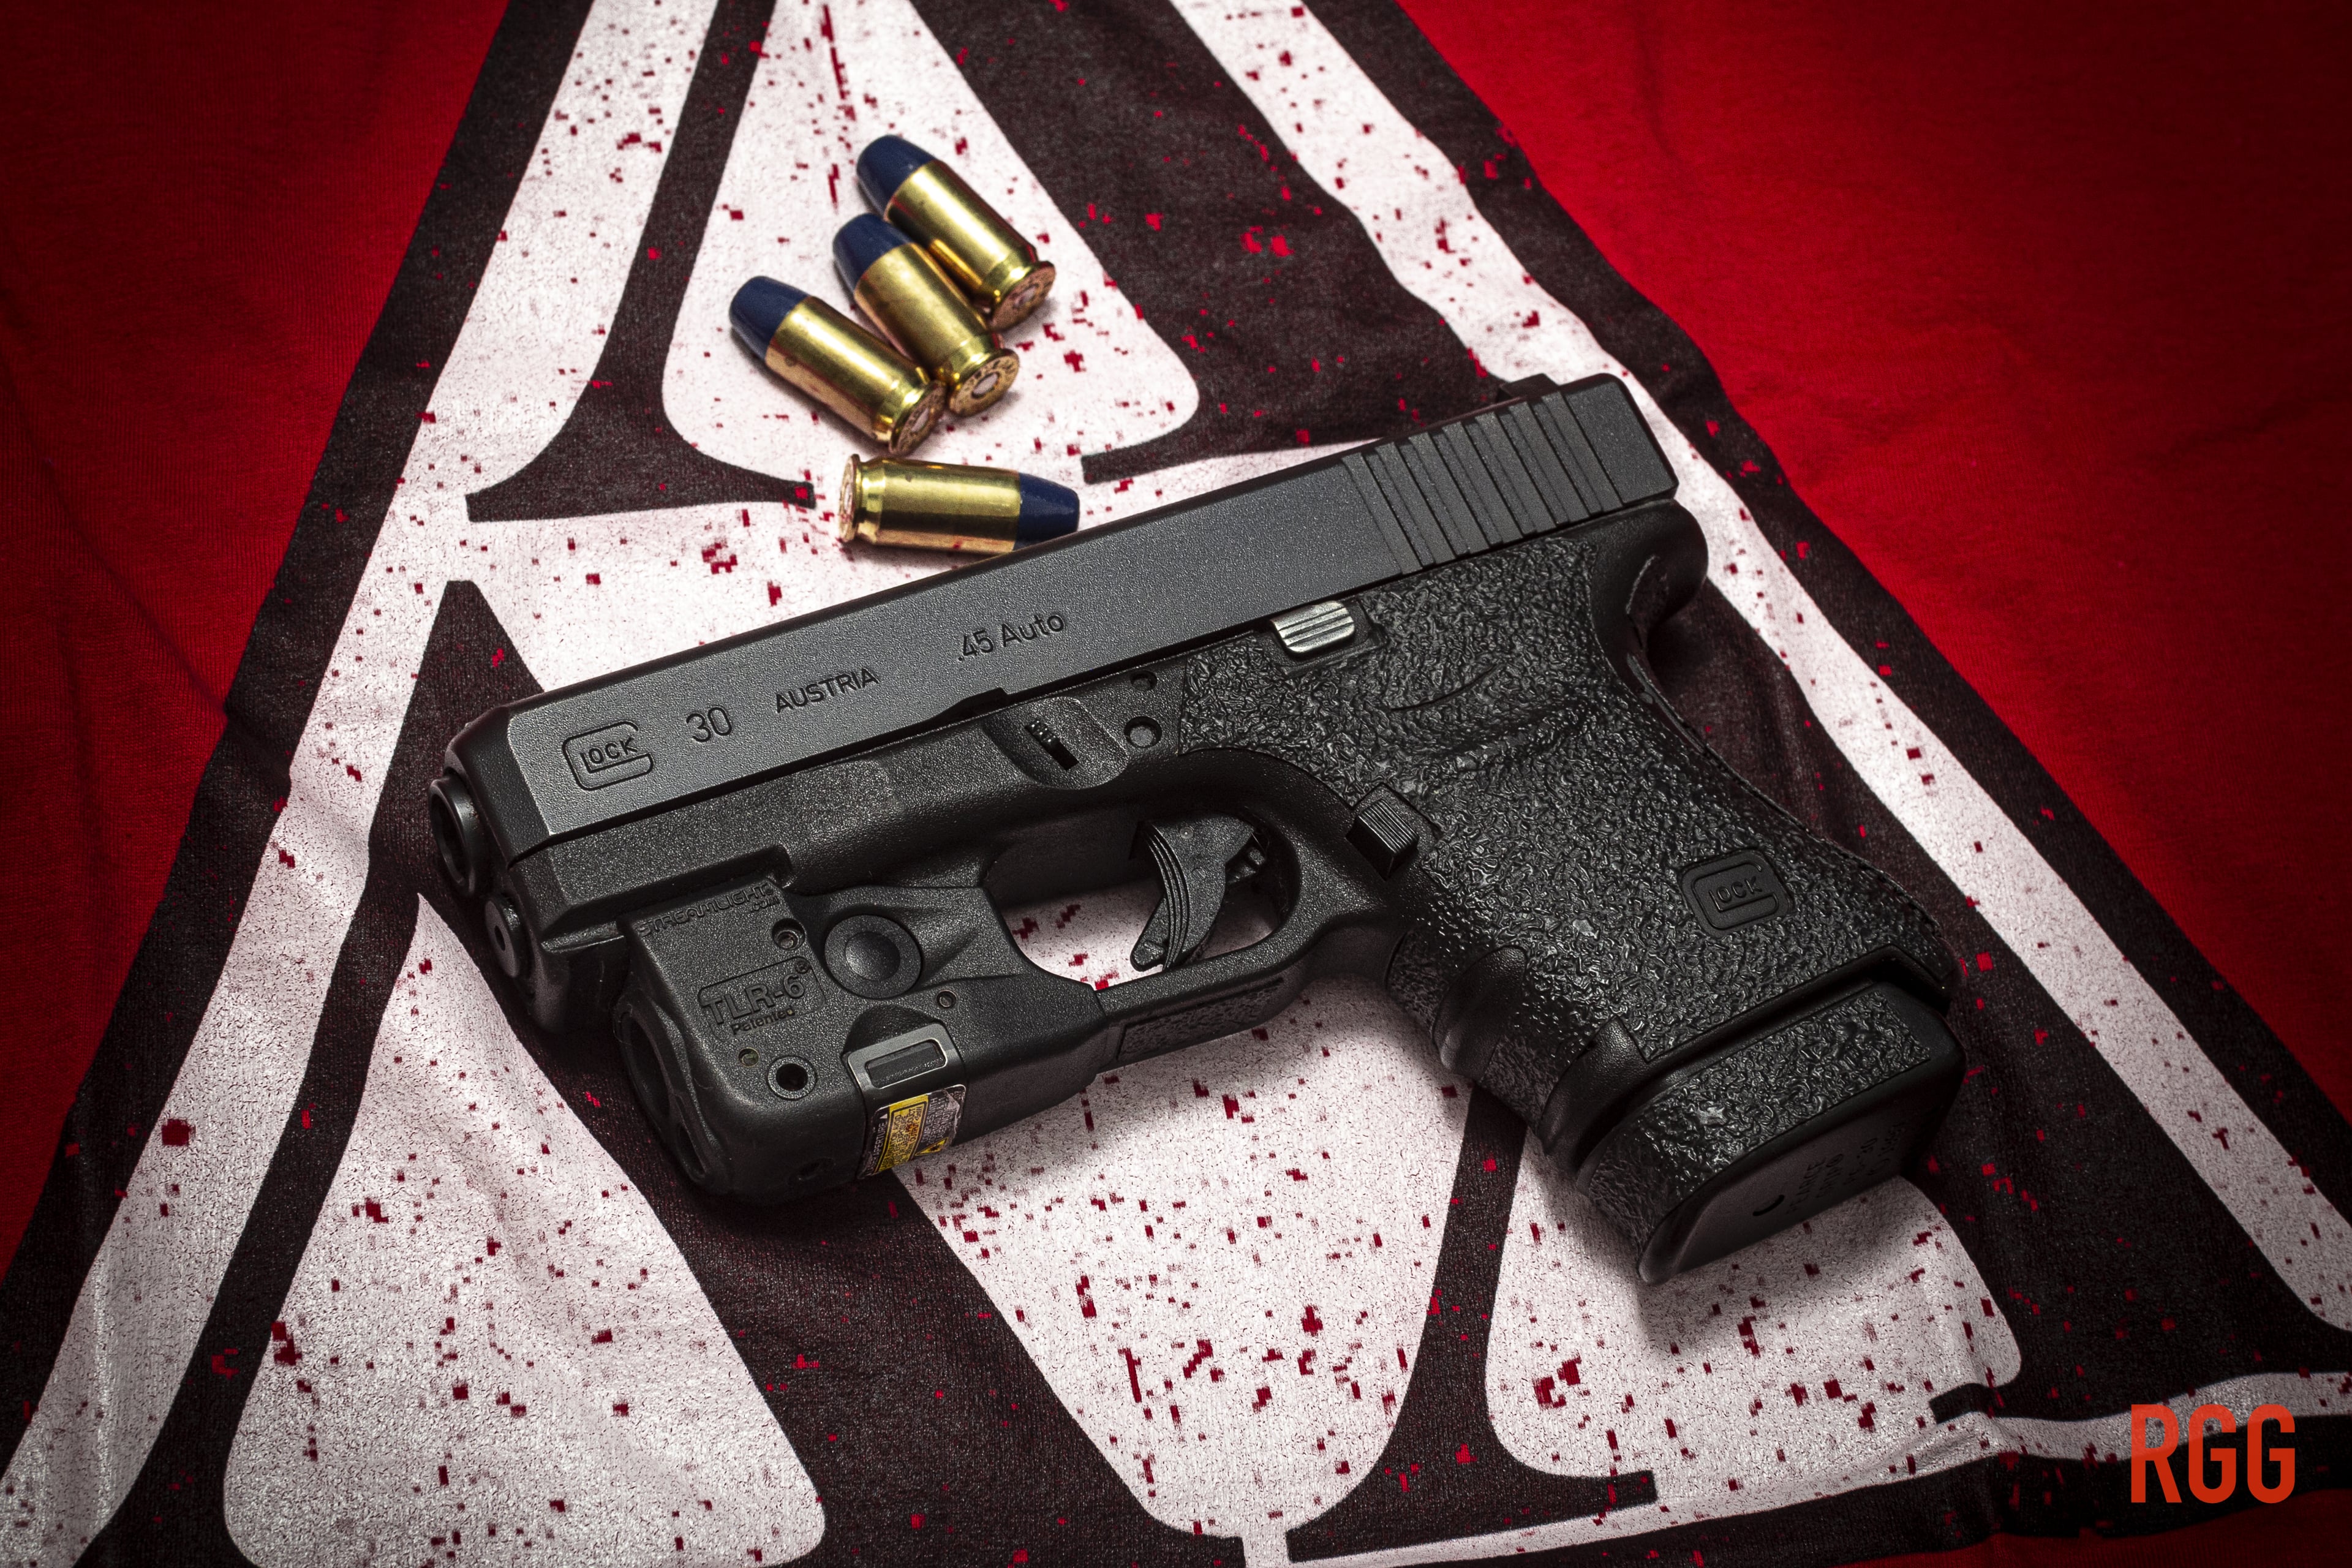 A GLOCK 30 .45 ACP pistol atop a logo of a well-known fraternity.